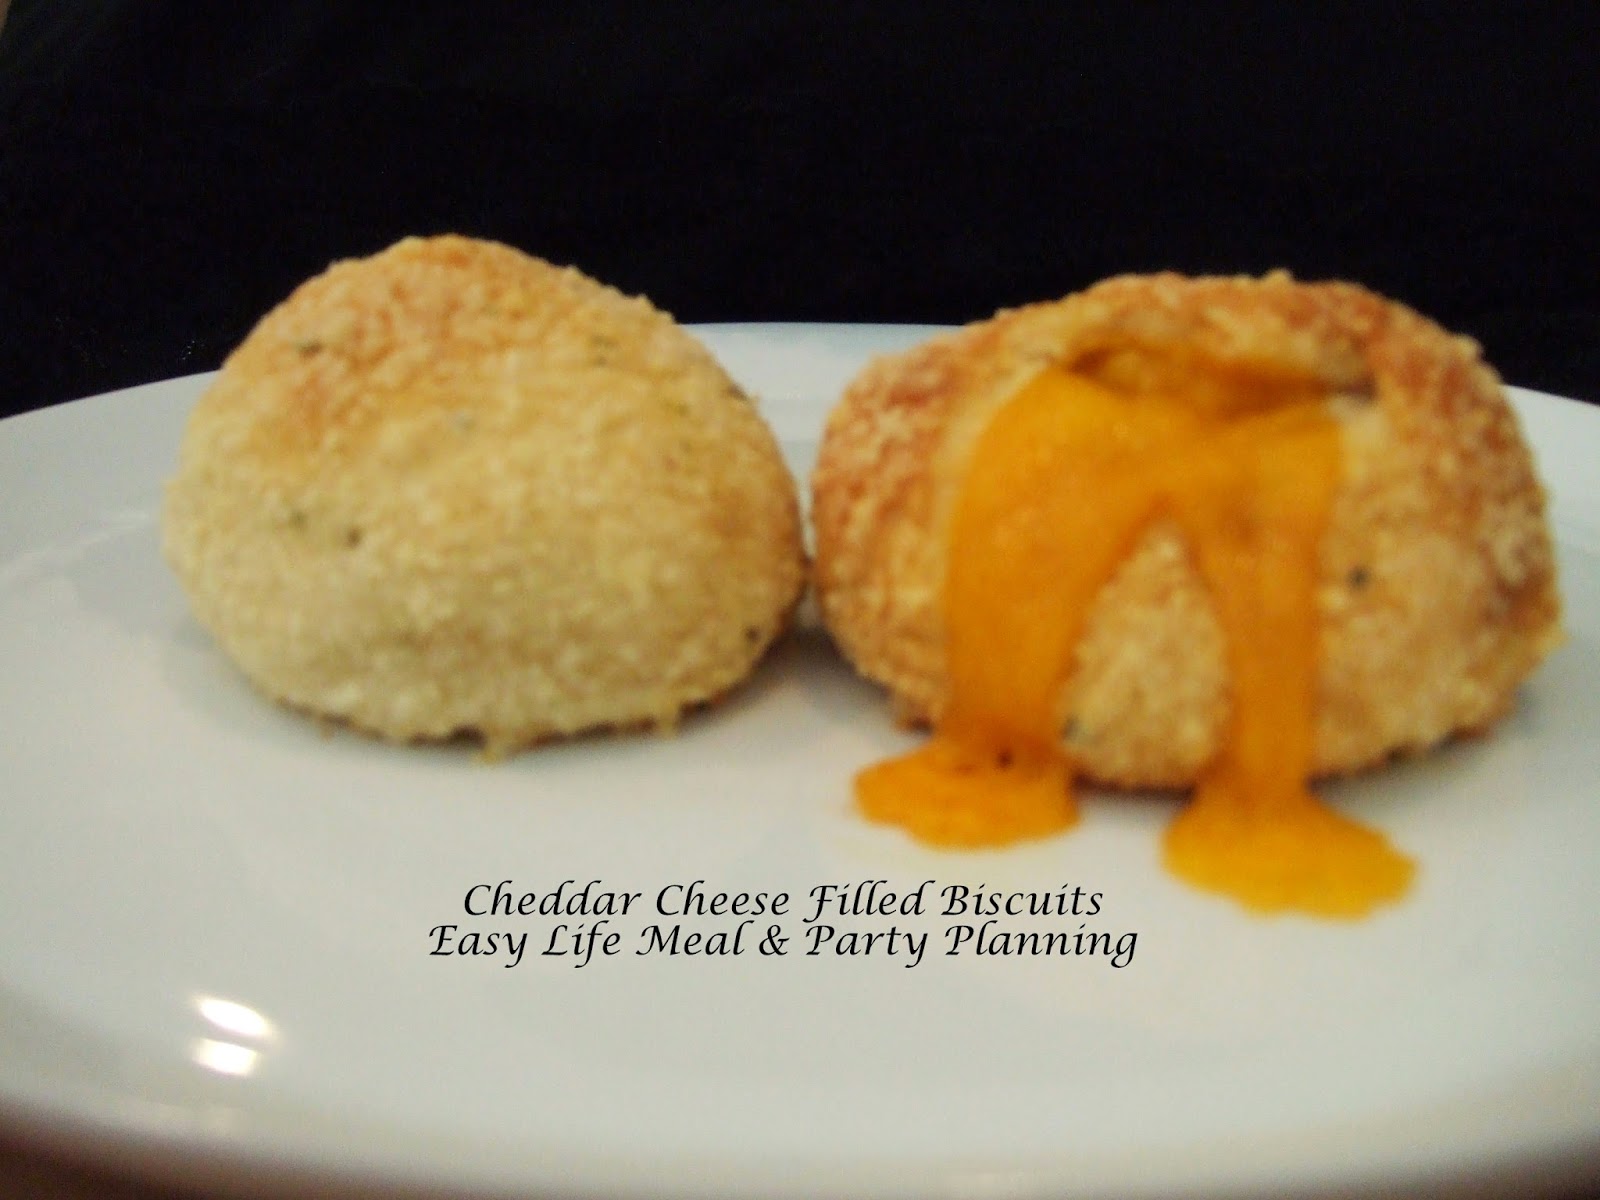 Cheddar Cheese Filled Biscuits by Easy Life Meal & Party Planning